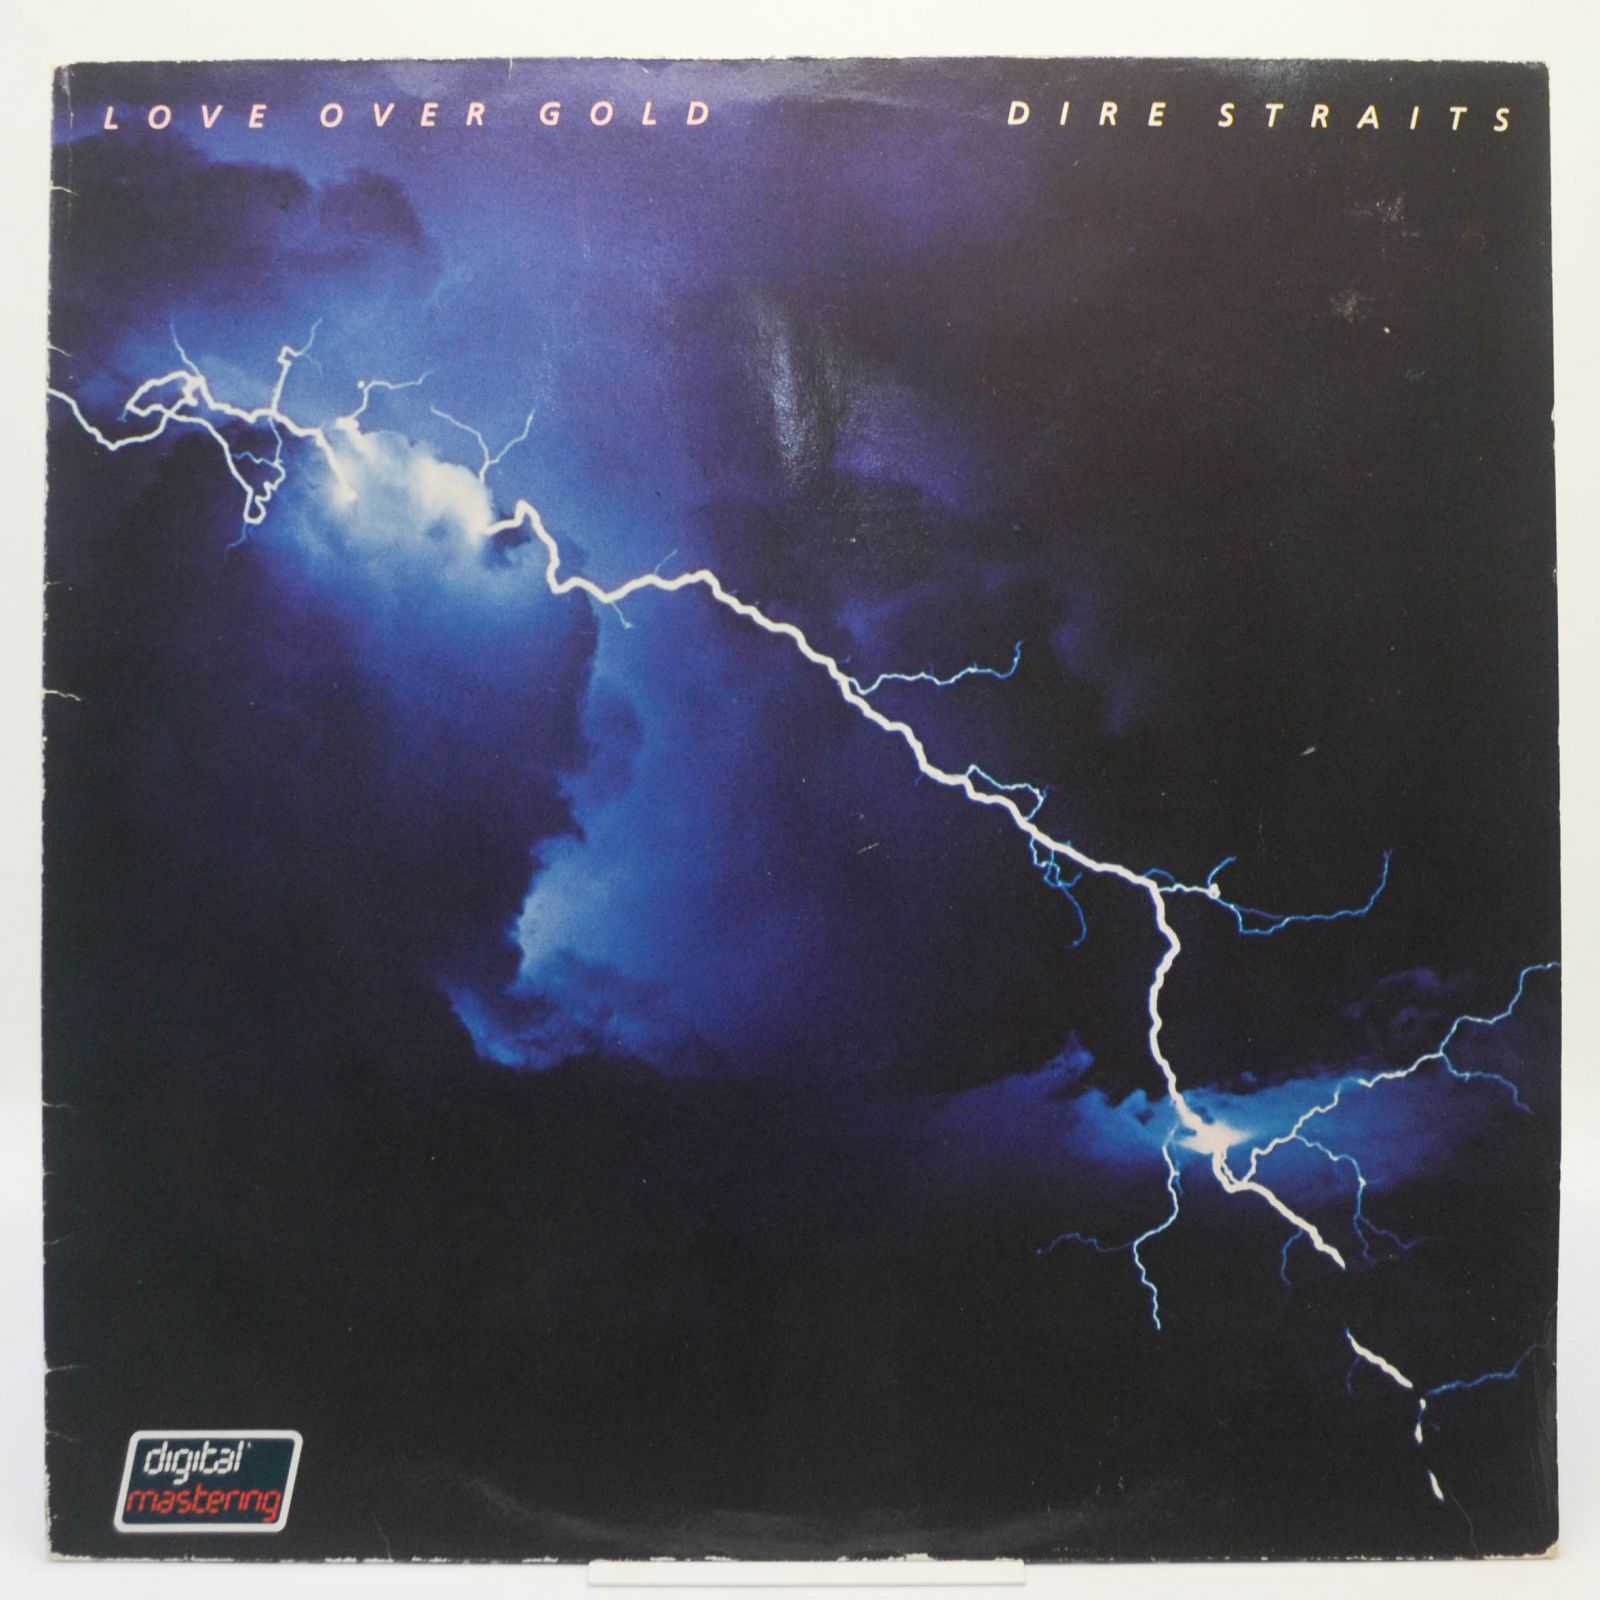 Dire Straits — Love Over Gold, 1982